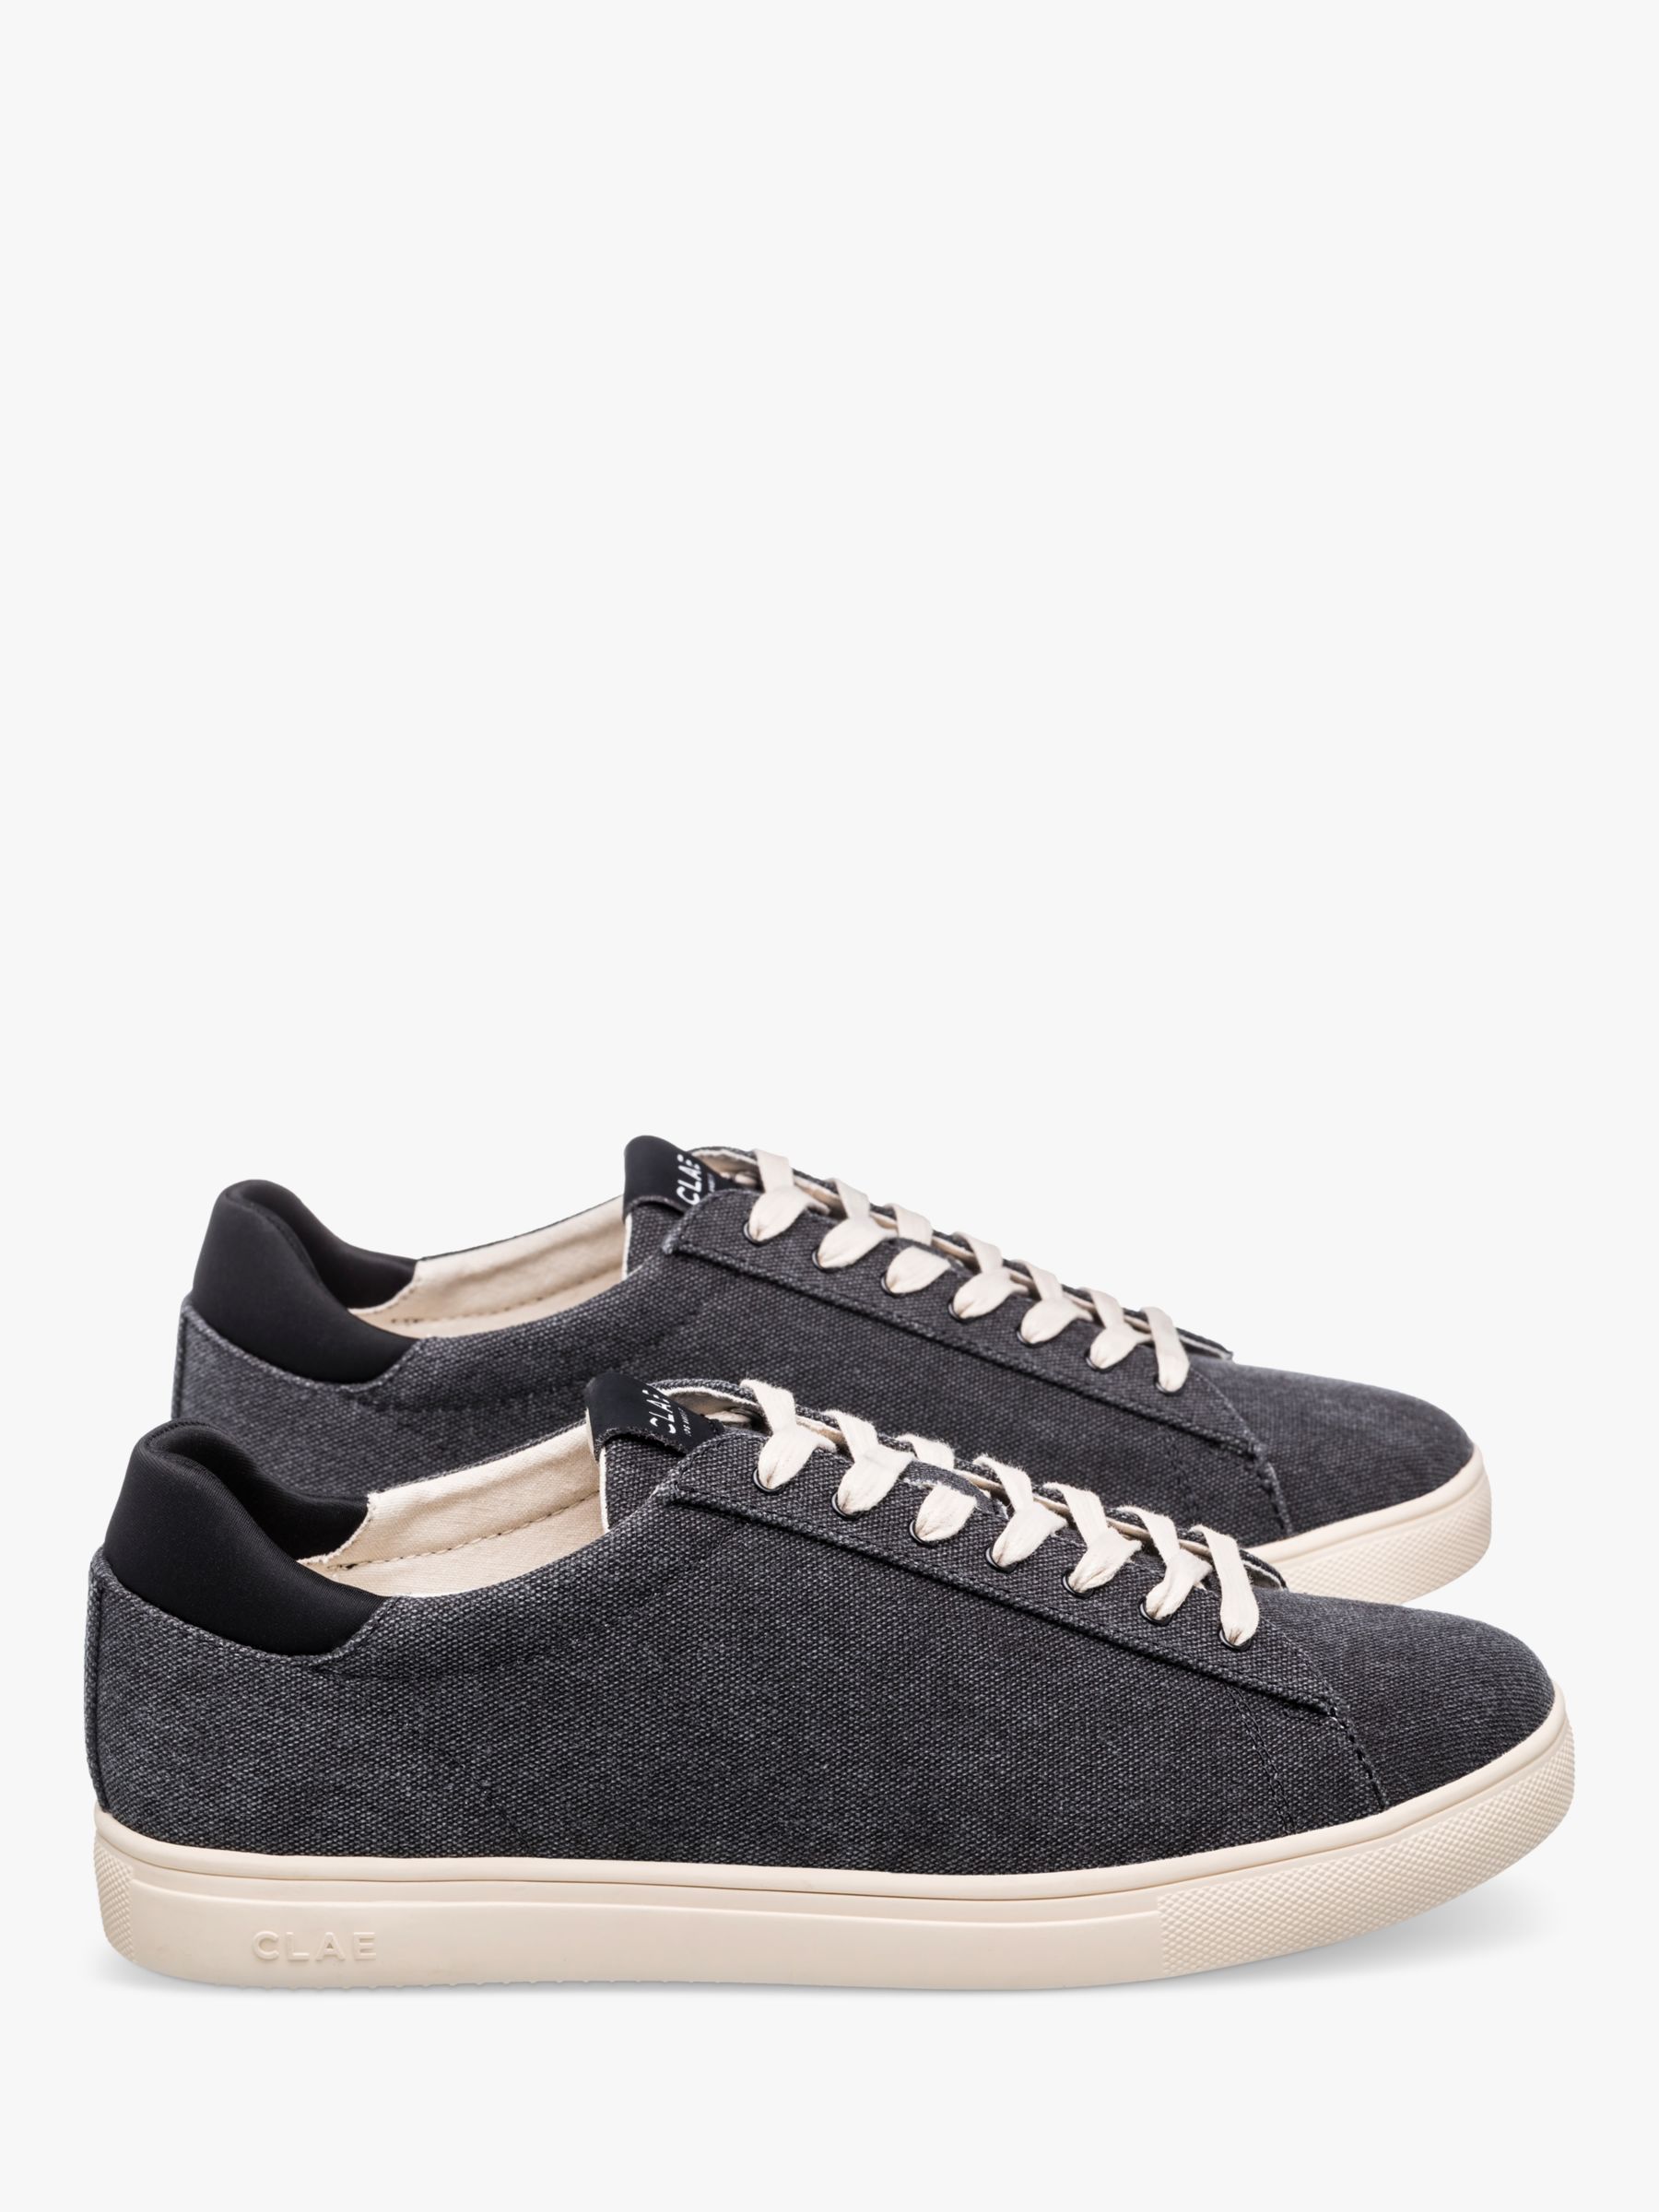 Buy CLAE Bradley Canvas Trainers, Washed Black Online at johnlewis.com